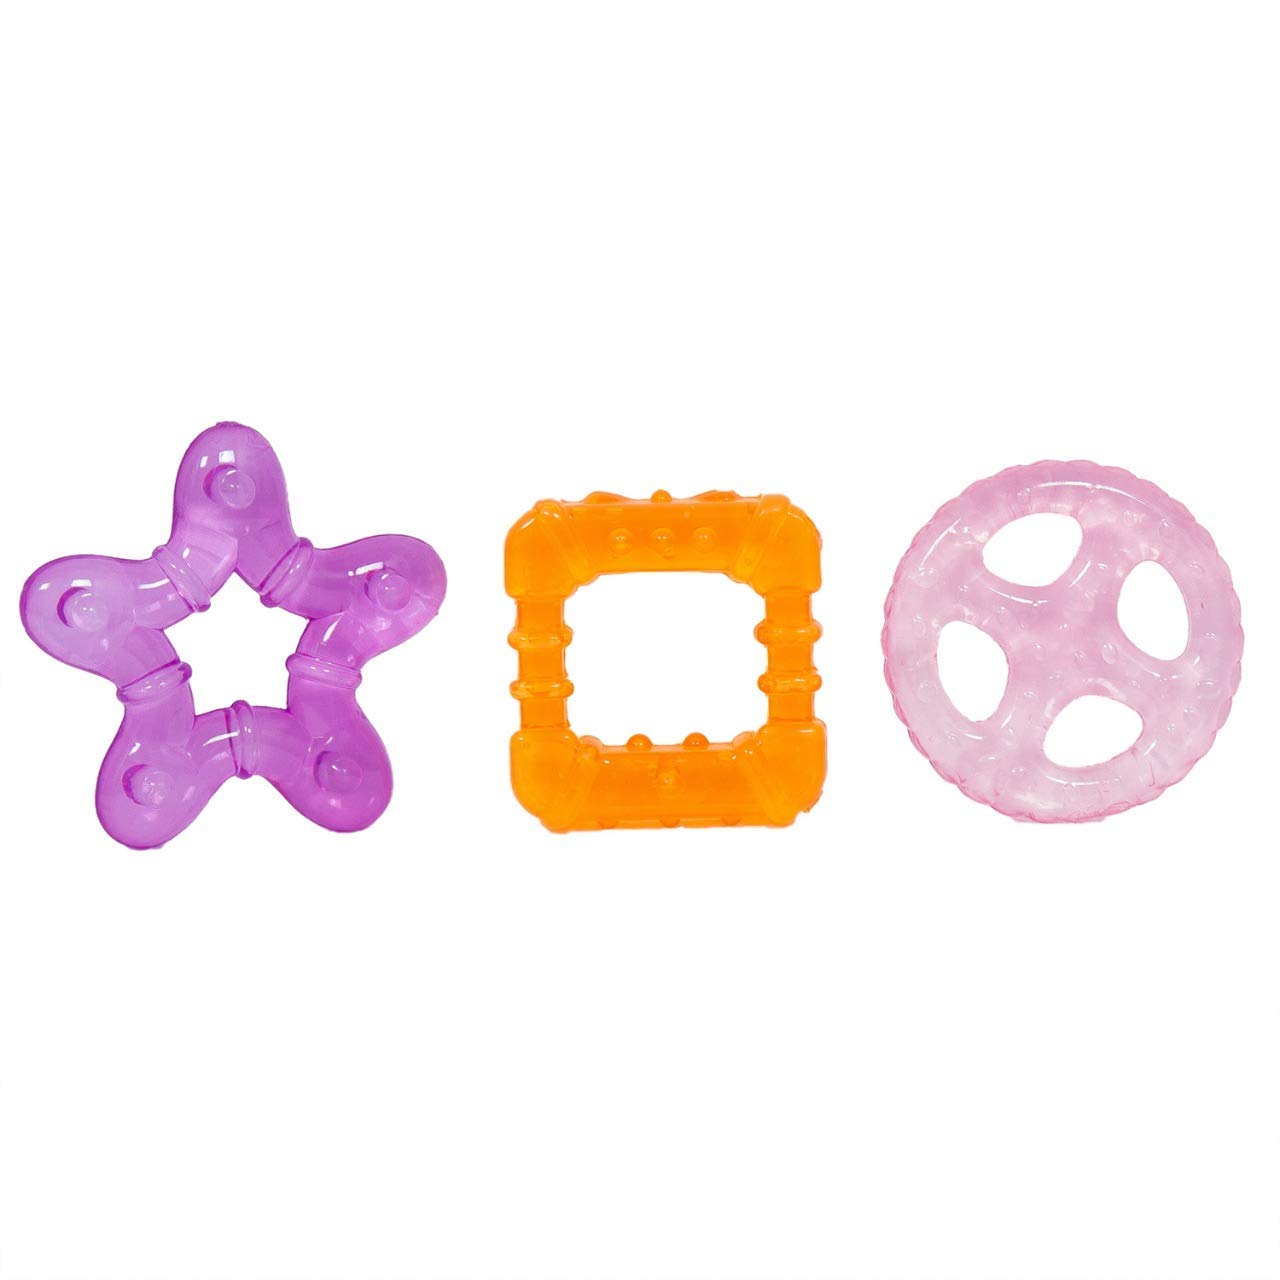 BAYBEE Natural BPA Free Silicone Teether Toy for Babies (Orange)